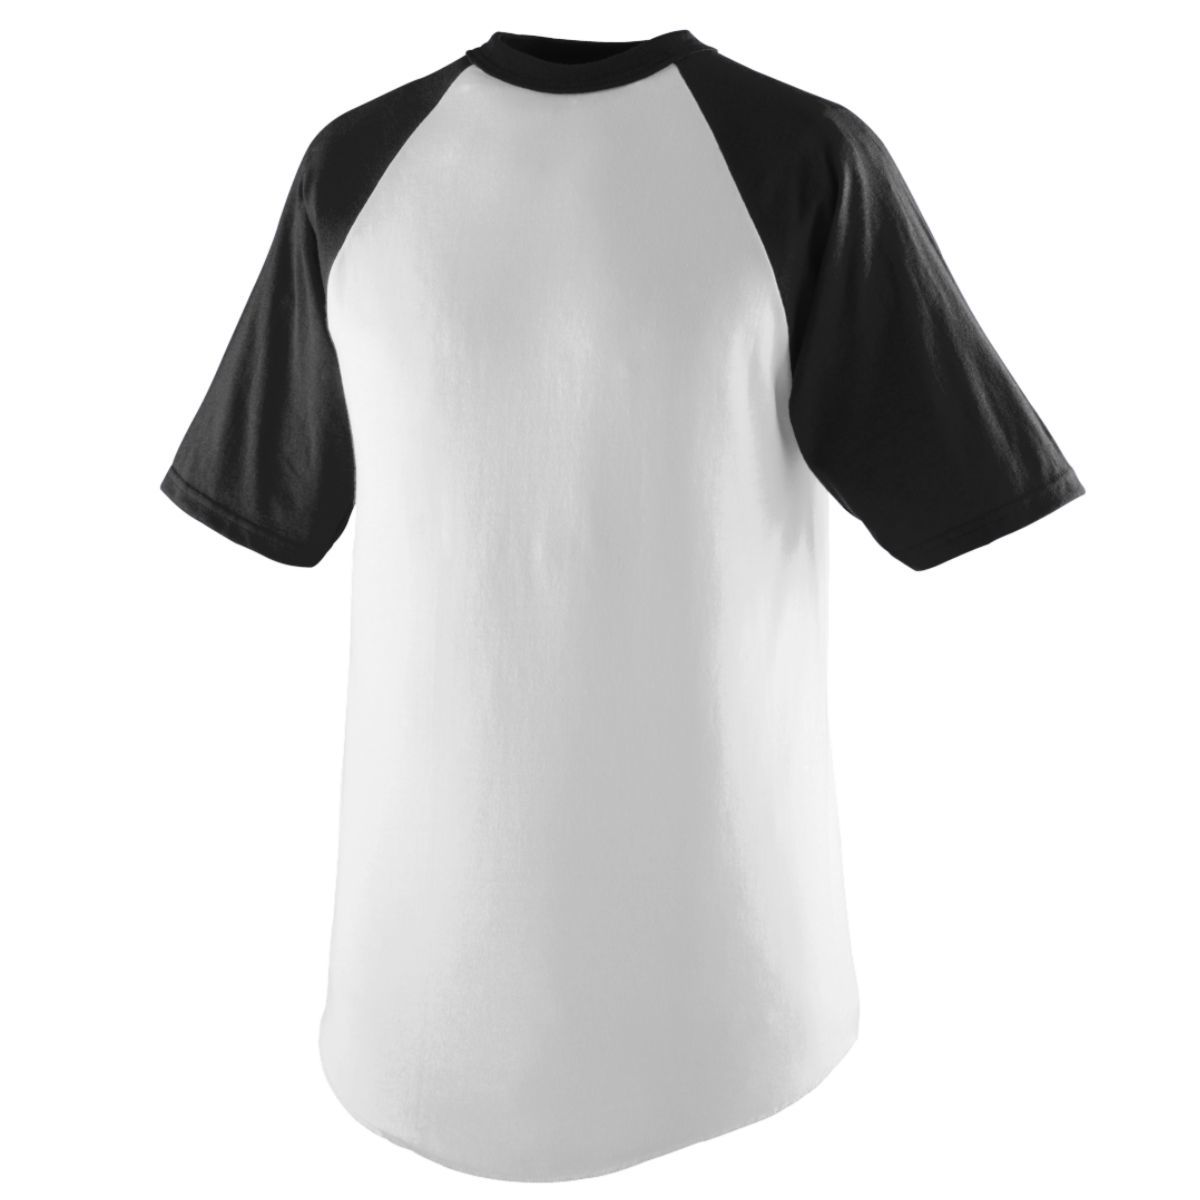 Augusta Sportswear Youth Short Sleeve Baseball Jersey in White/Black  -Part of the Youth, Youth-Jersey, Augusta-Products, Baseball, Shirts, All-Sports, All-Sports-1 product lines at KanaleyCreations.com